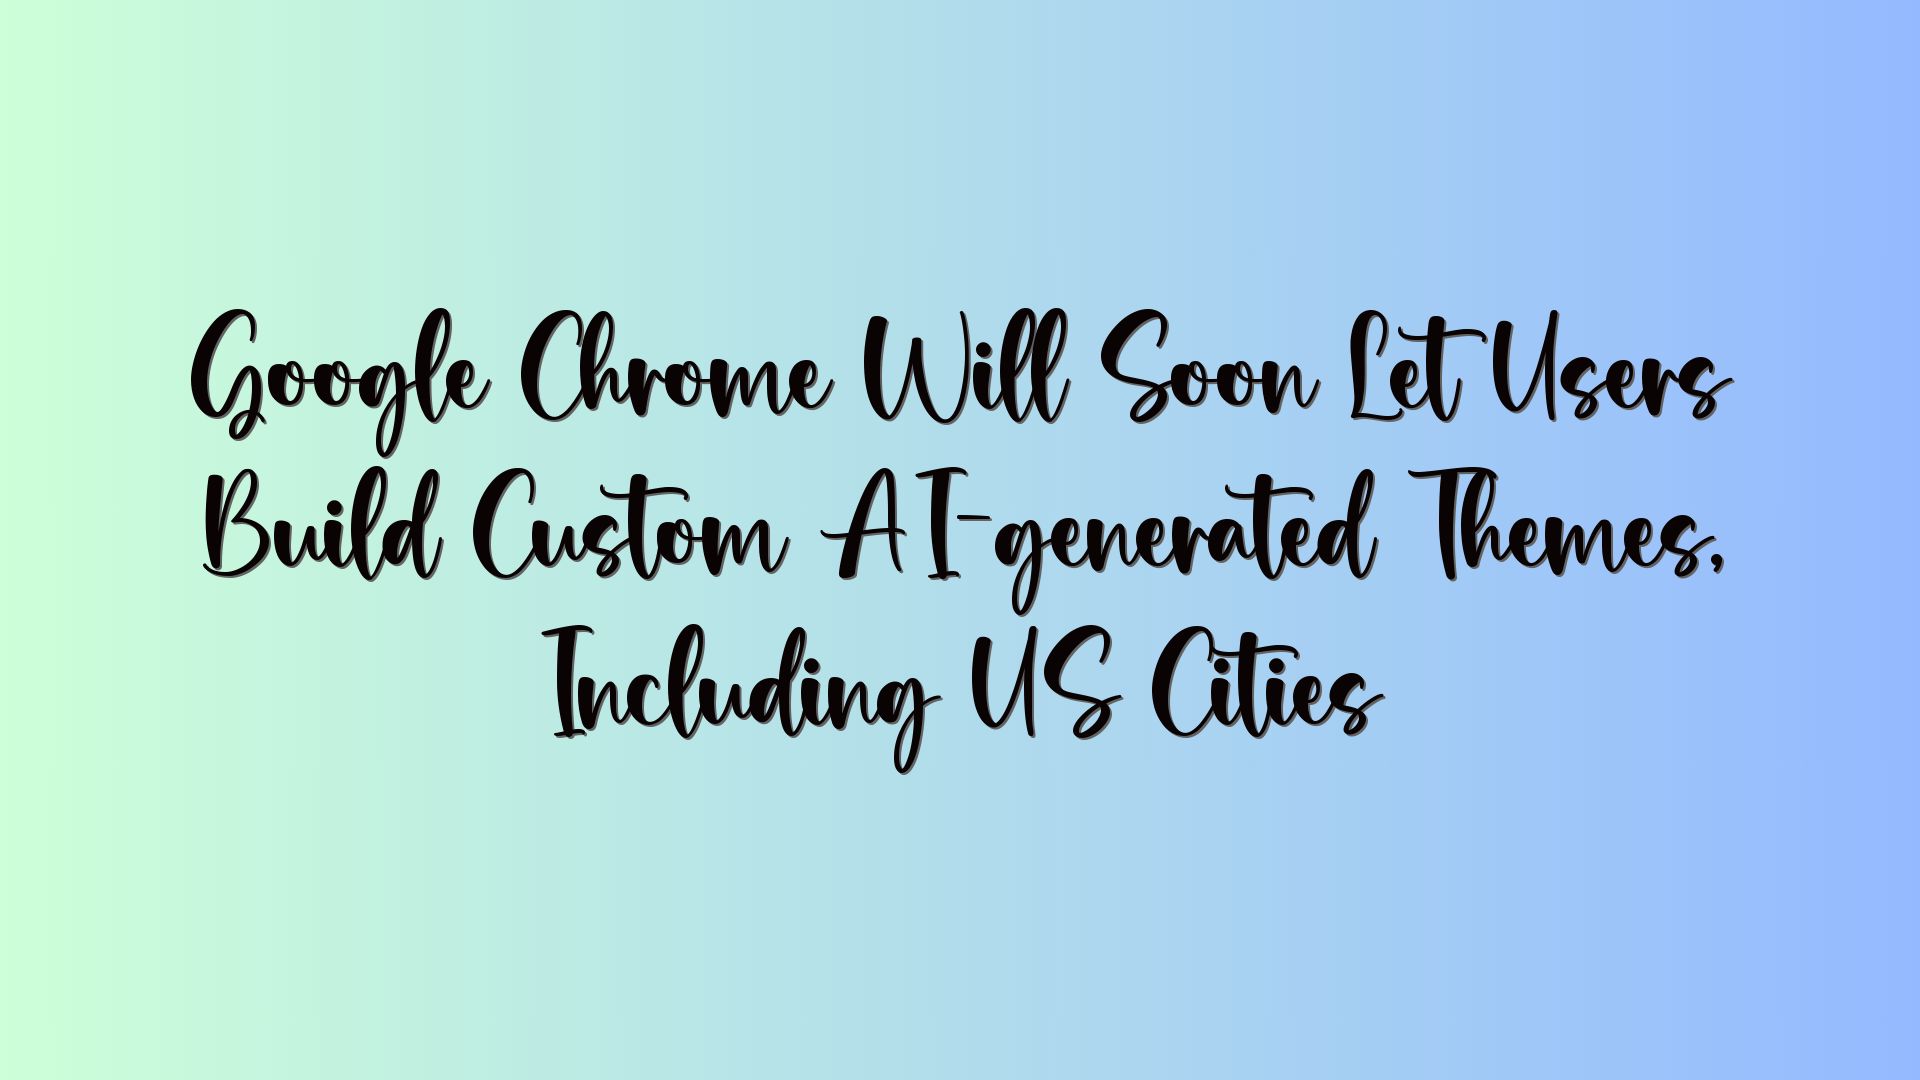 Google Chrome Will Soon Let Users Build Custom AI-generated Themes, Including US Cities